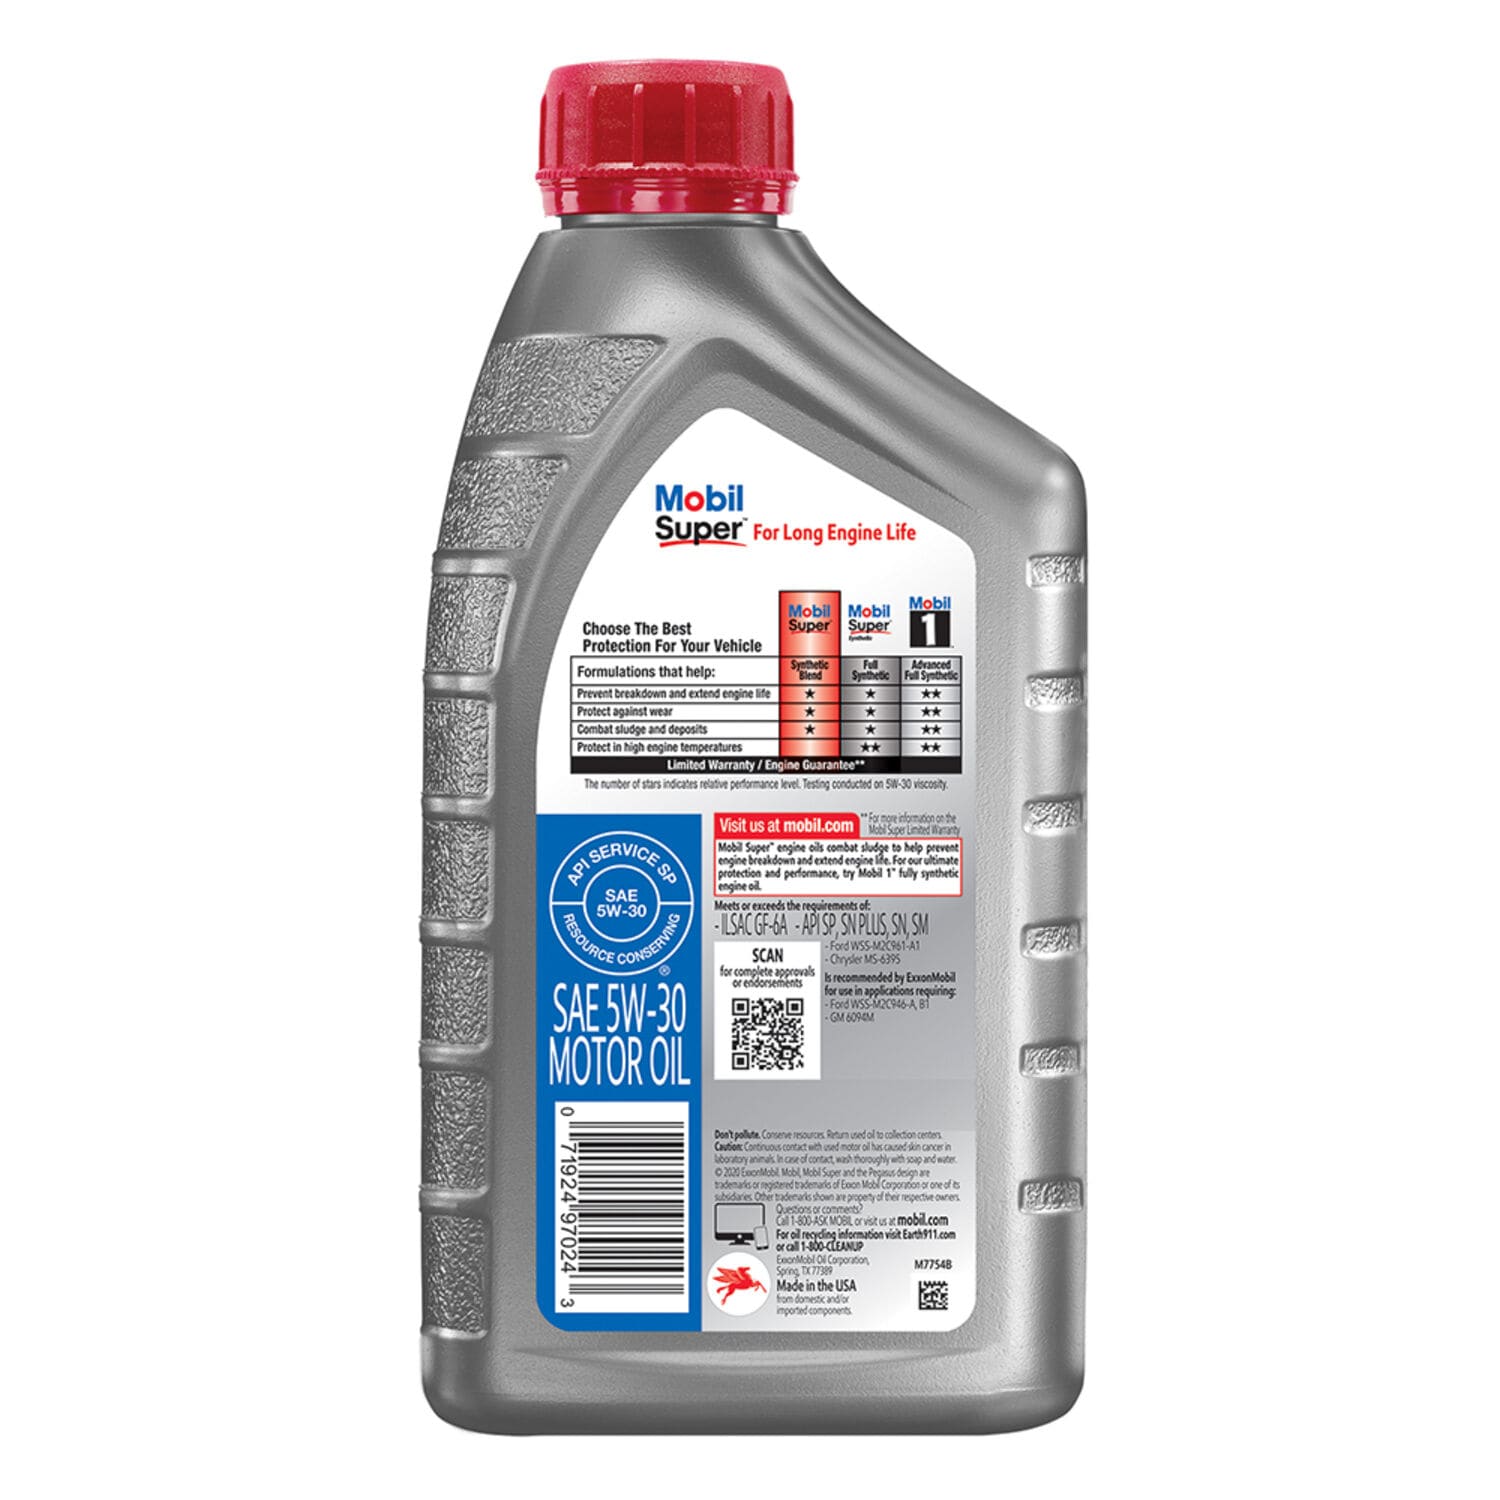 Mobil 1 Synthetic 5W-30 Motor Oil - Advanced Full Synthetic